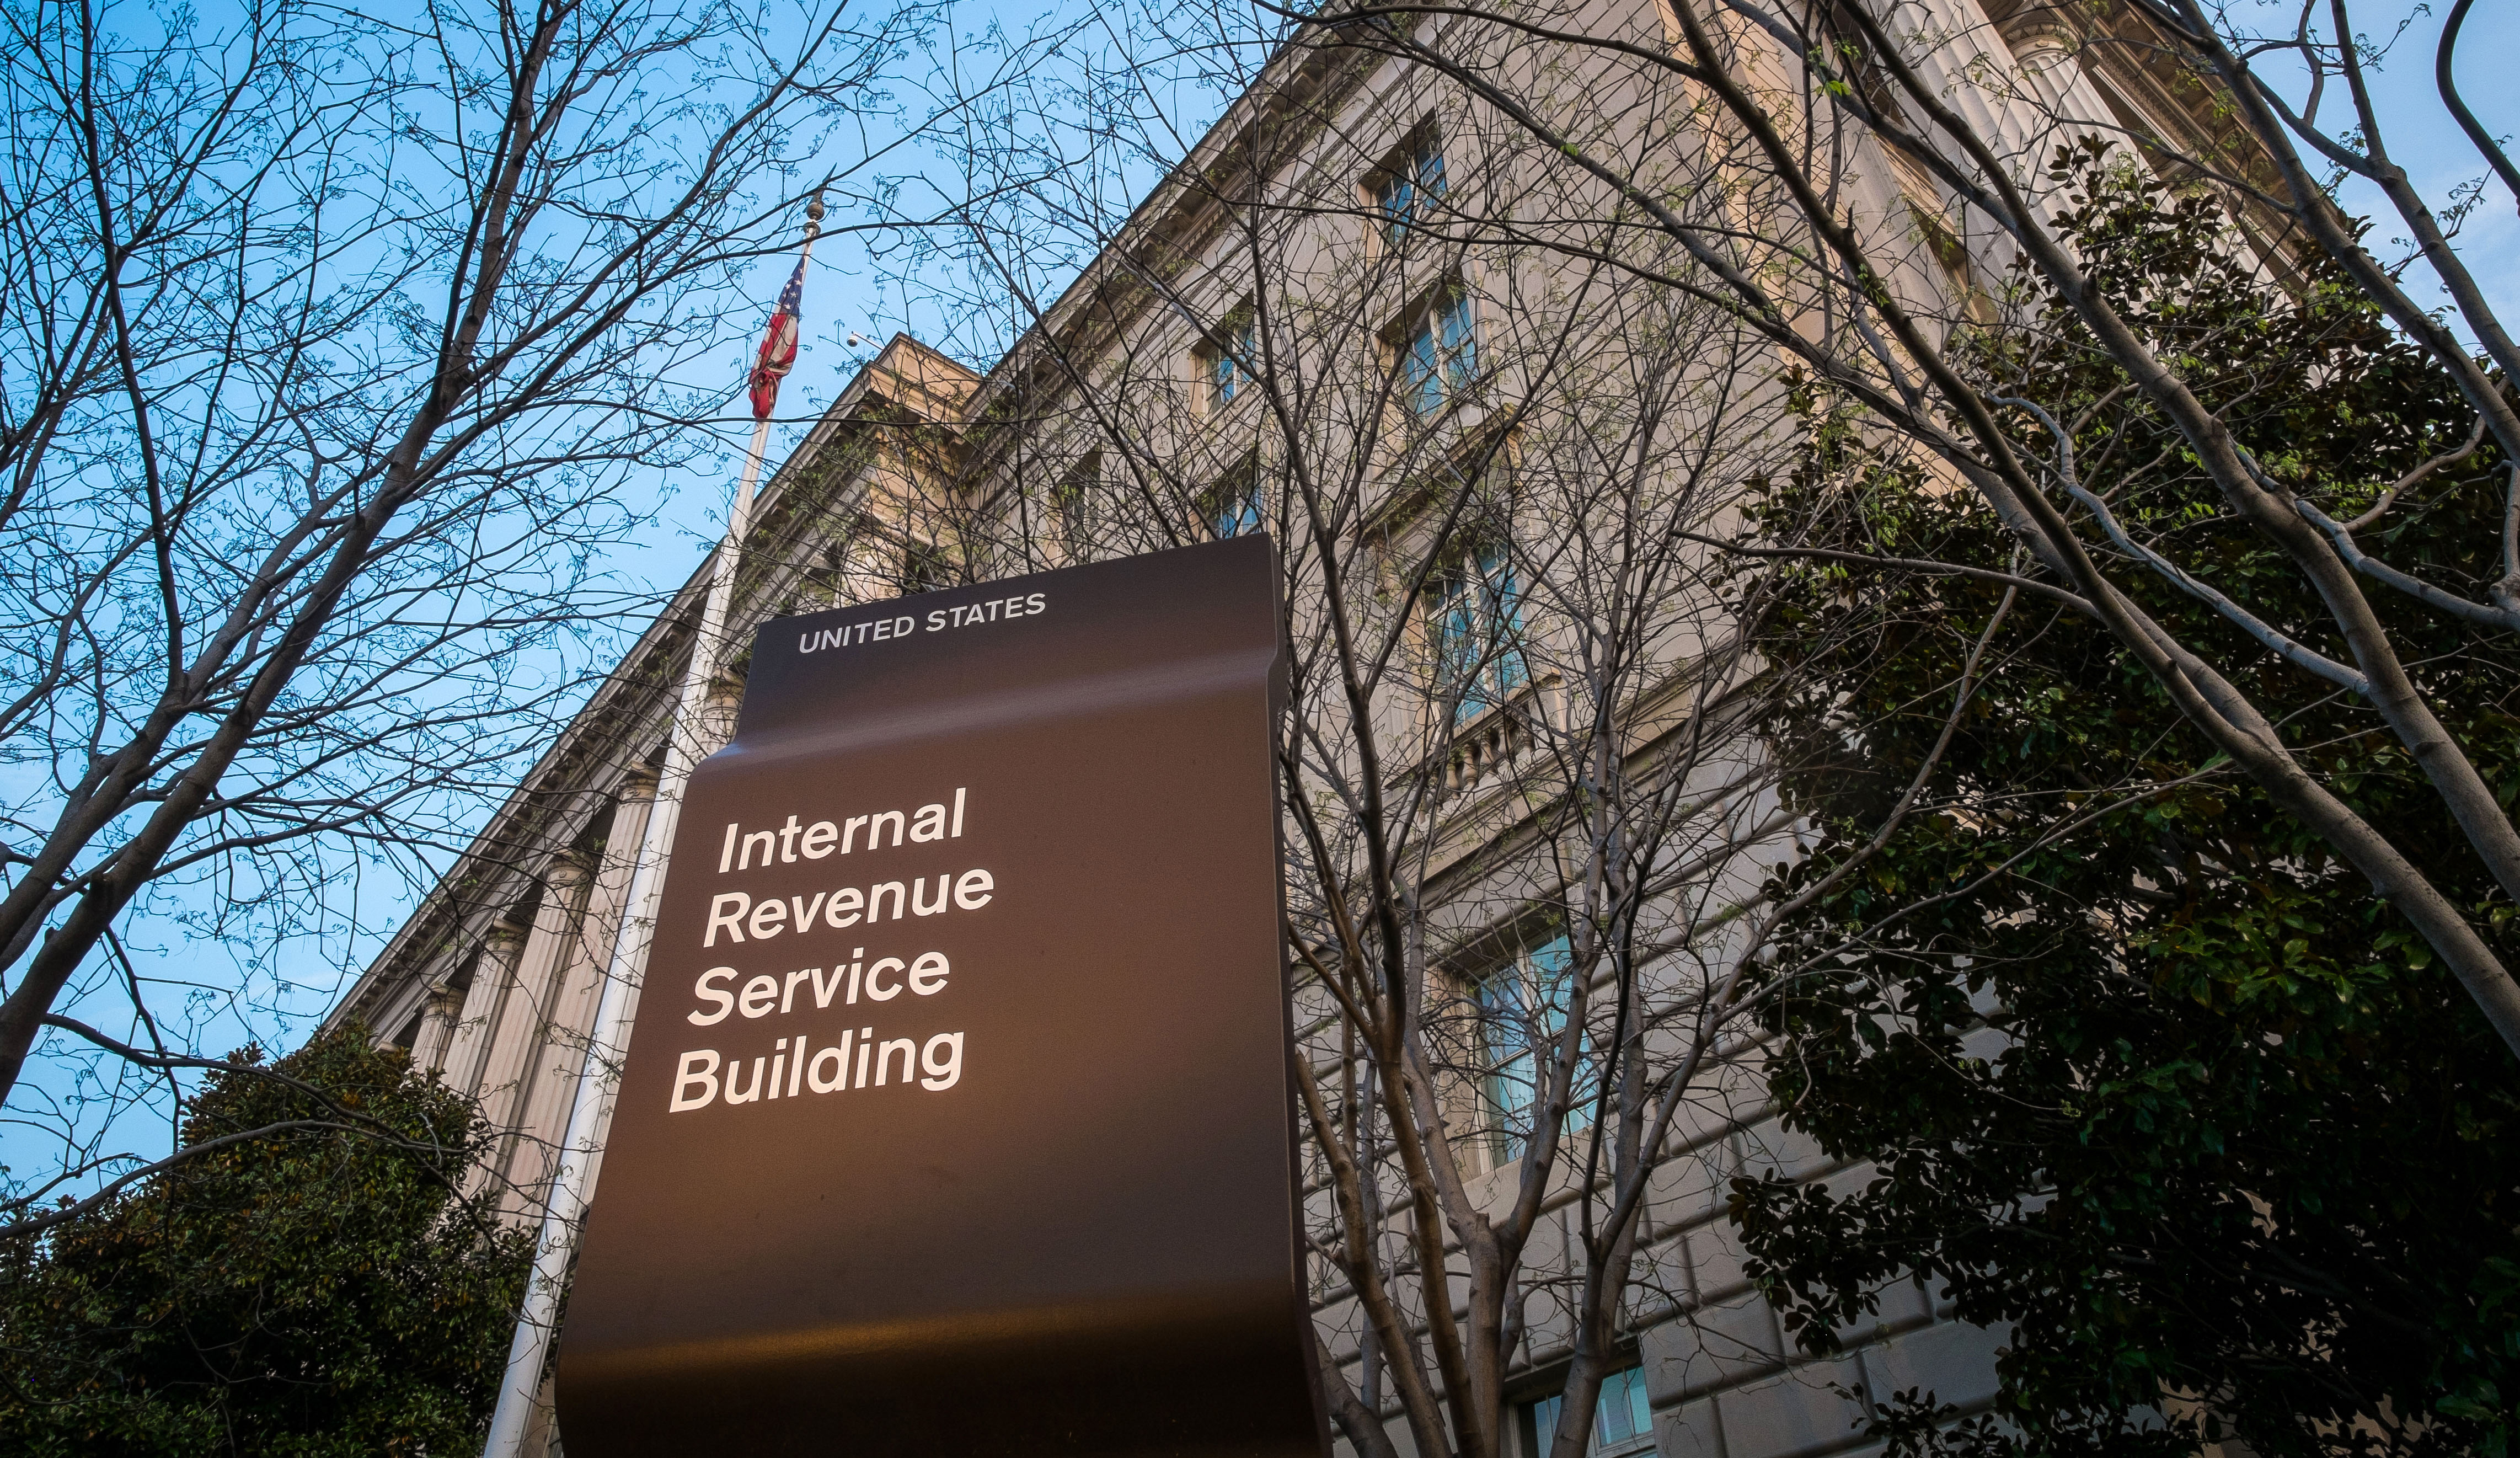 FILE- In this April 13, 2014 file photo, the Internal Revenue Service Headquarters (IRS) building is seen in Washington. (AP Photo/J. David Ake, File)